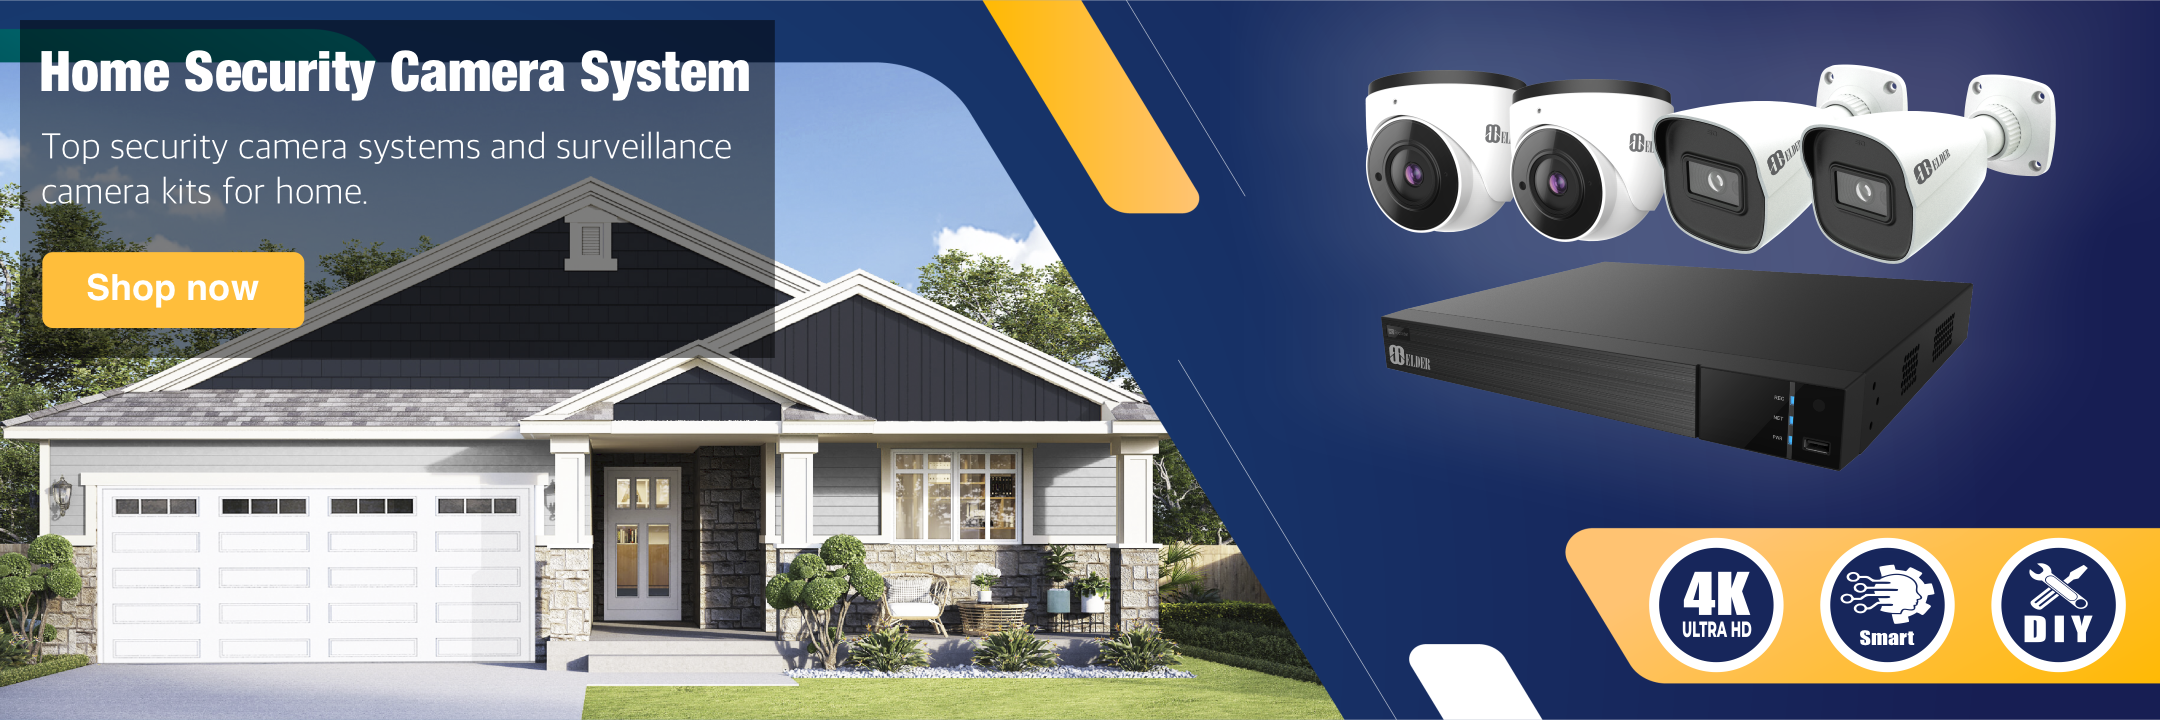 Elder security camera system is a trusted home security camera system and business security camera system. Keep your belongings safe with top security camera systems and surveillance camera systems.